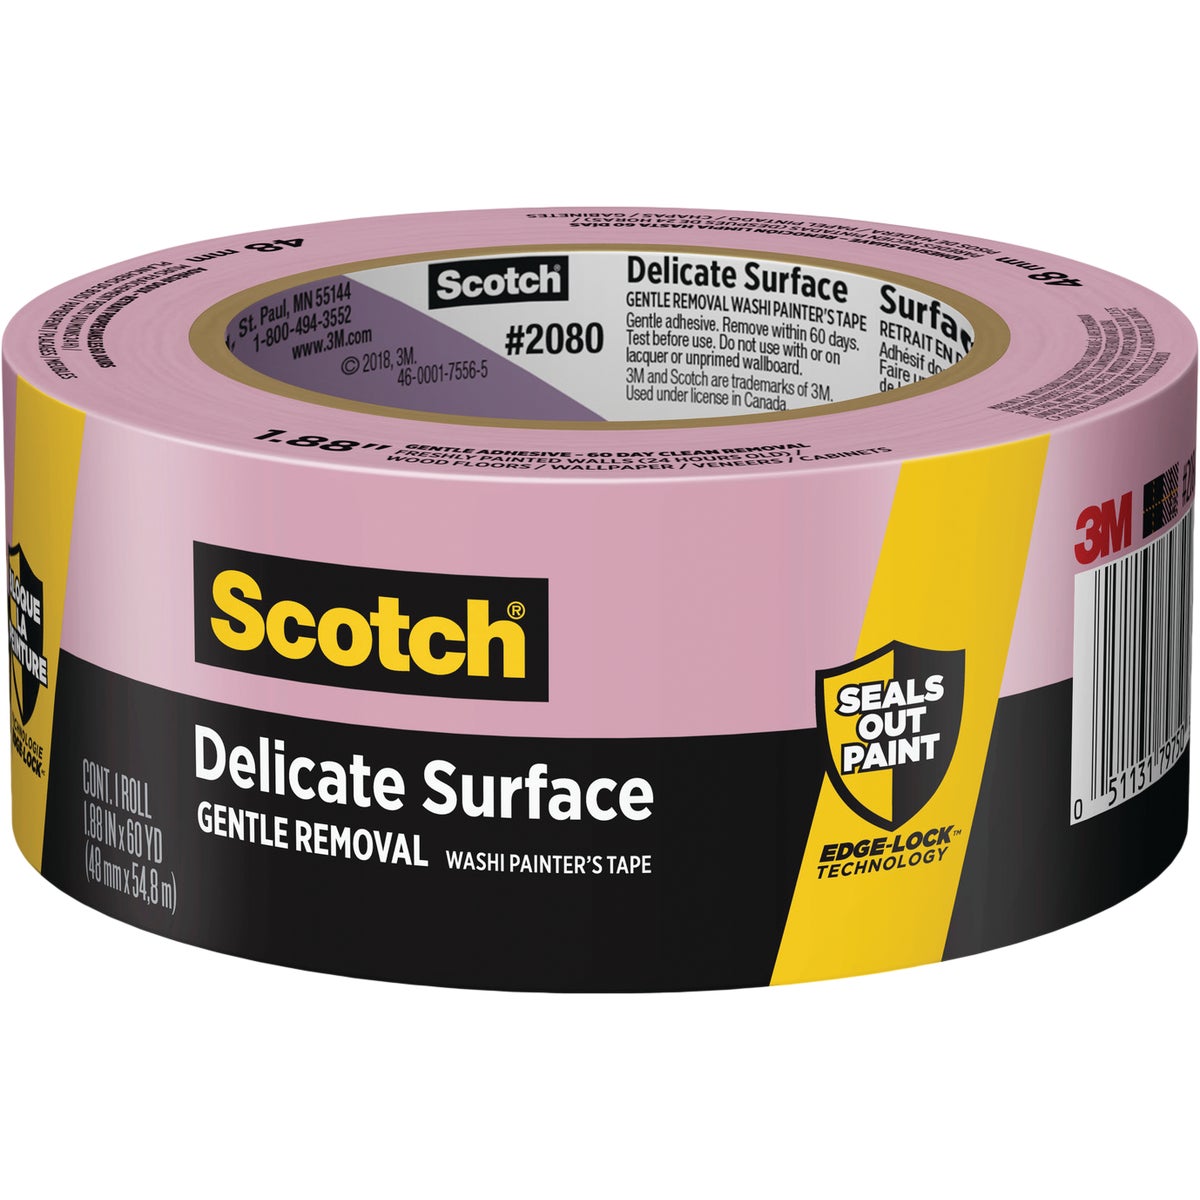 Scotch 1.88 In. x 60 Yd. Delicate Surface Painter's Tape